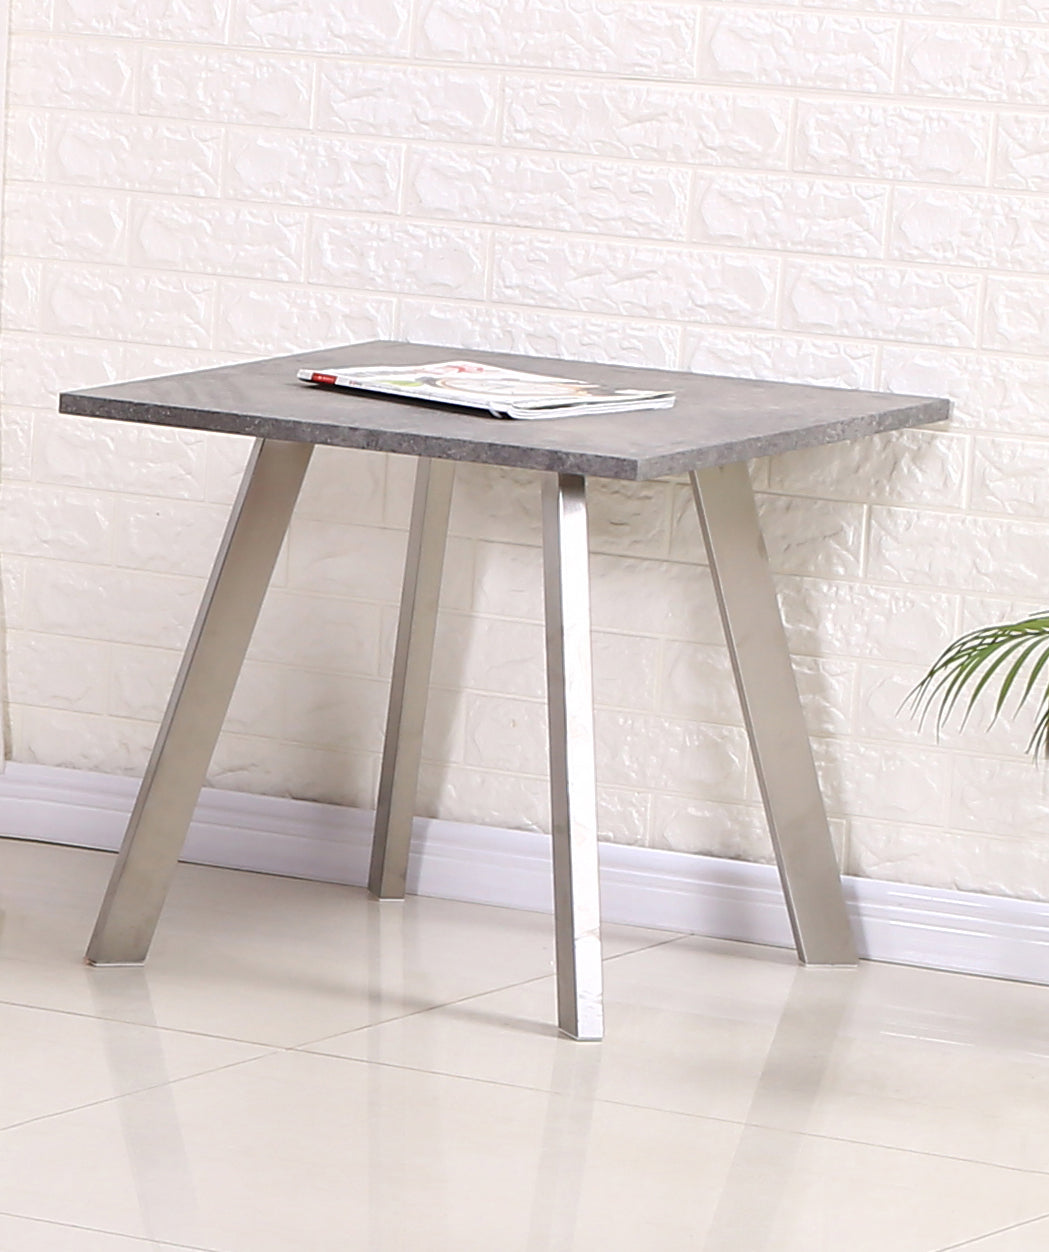 Calipso Lamp Table Concrete with Brushed Stainless Steel Legs